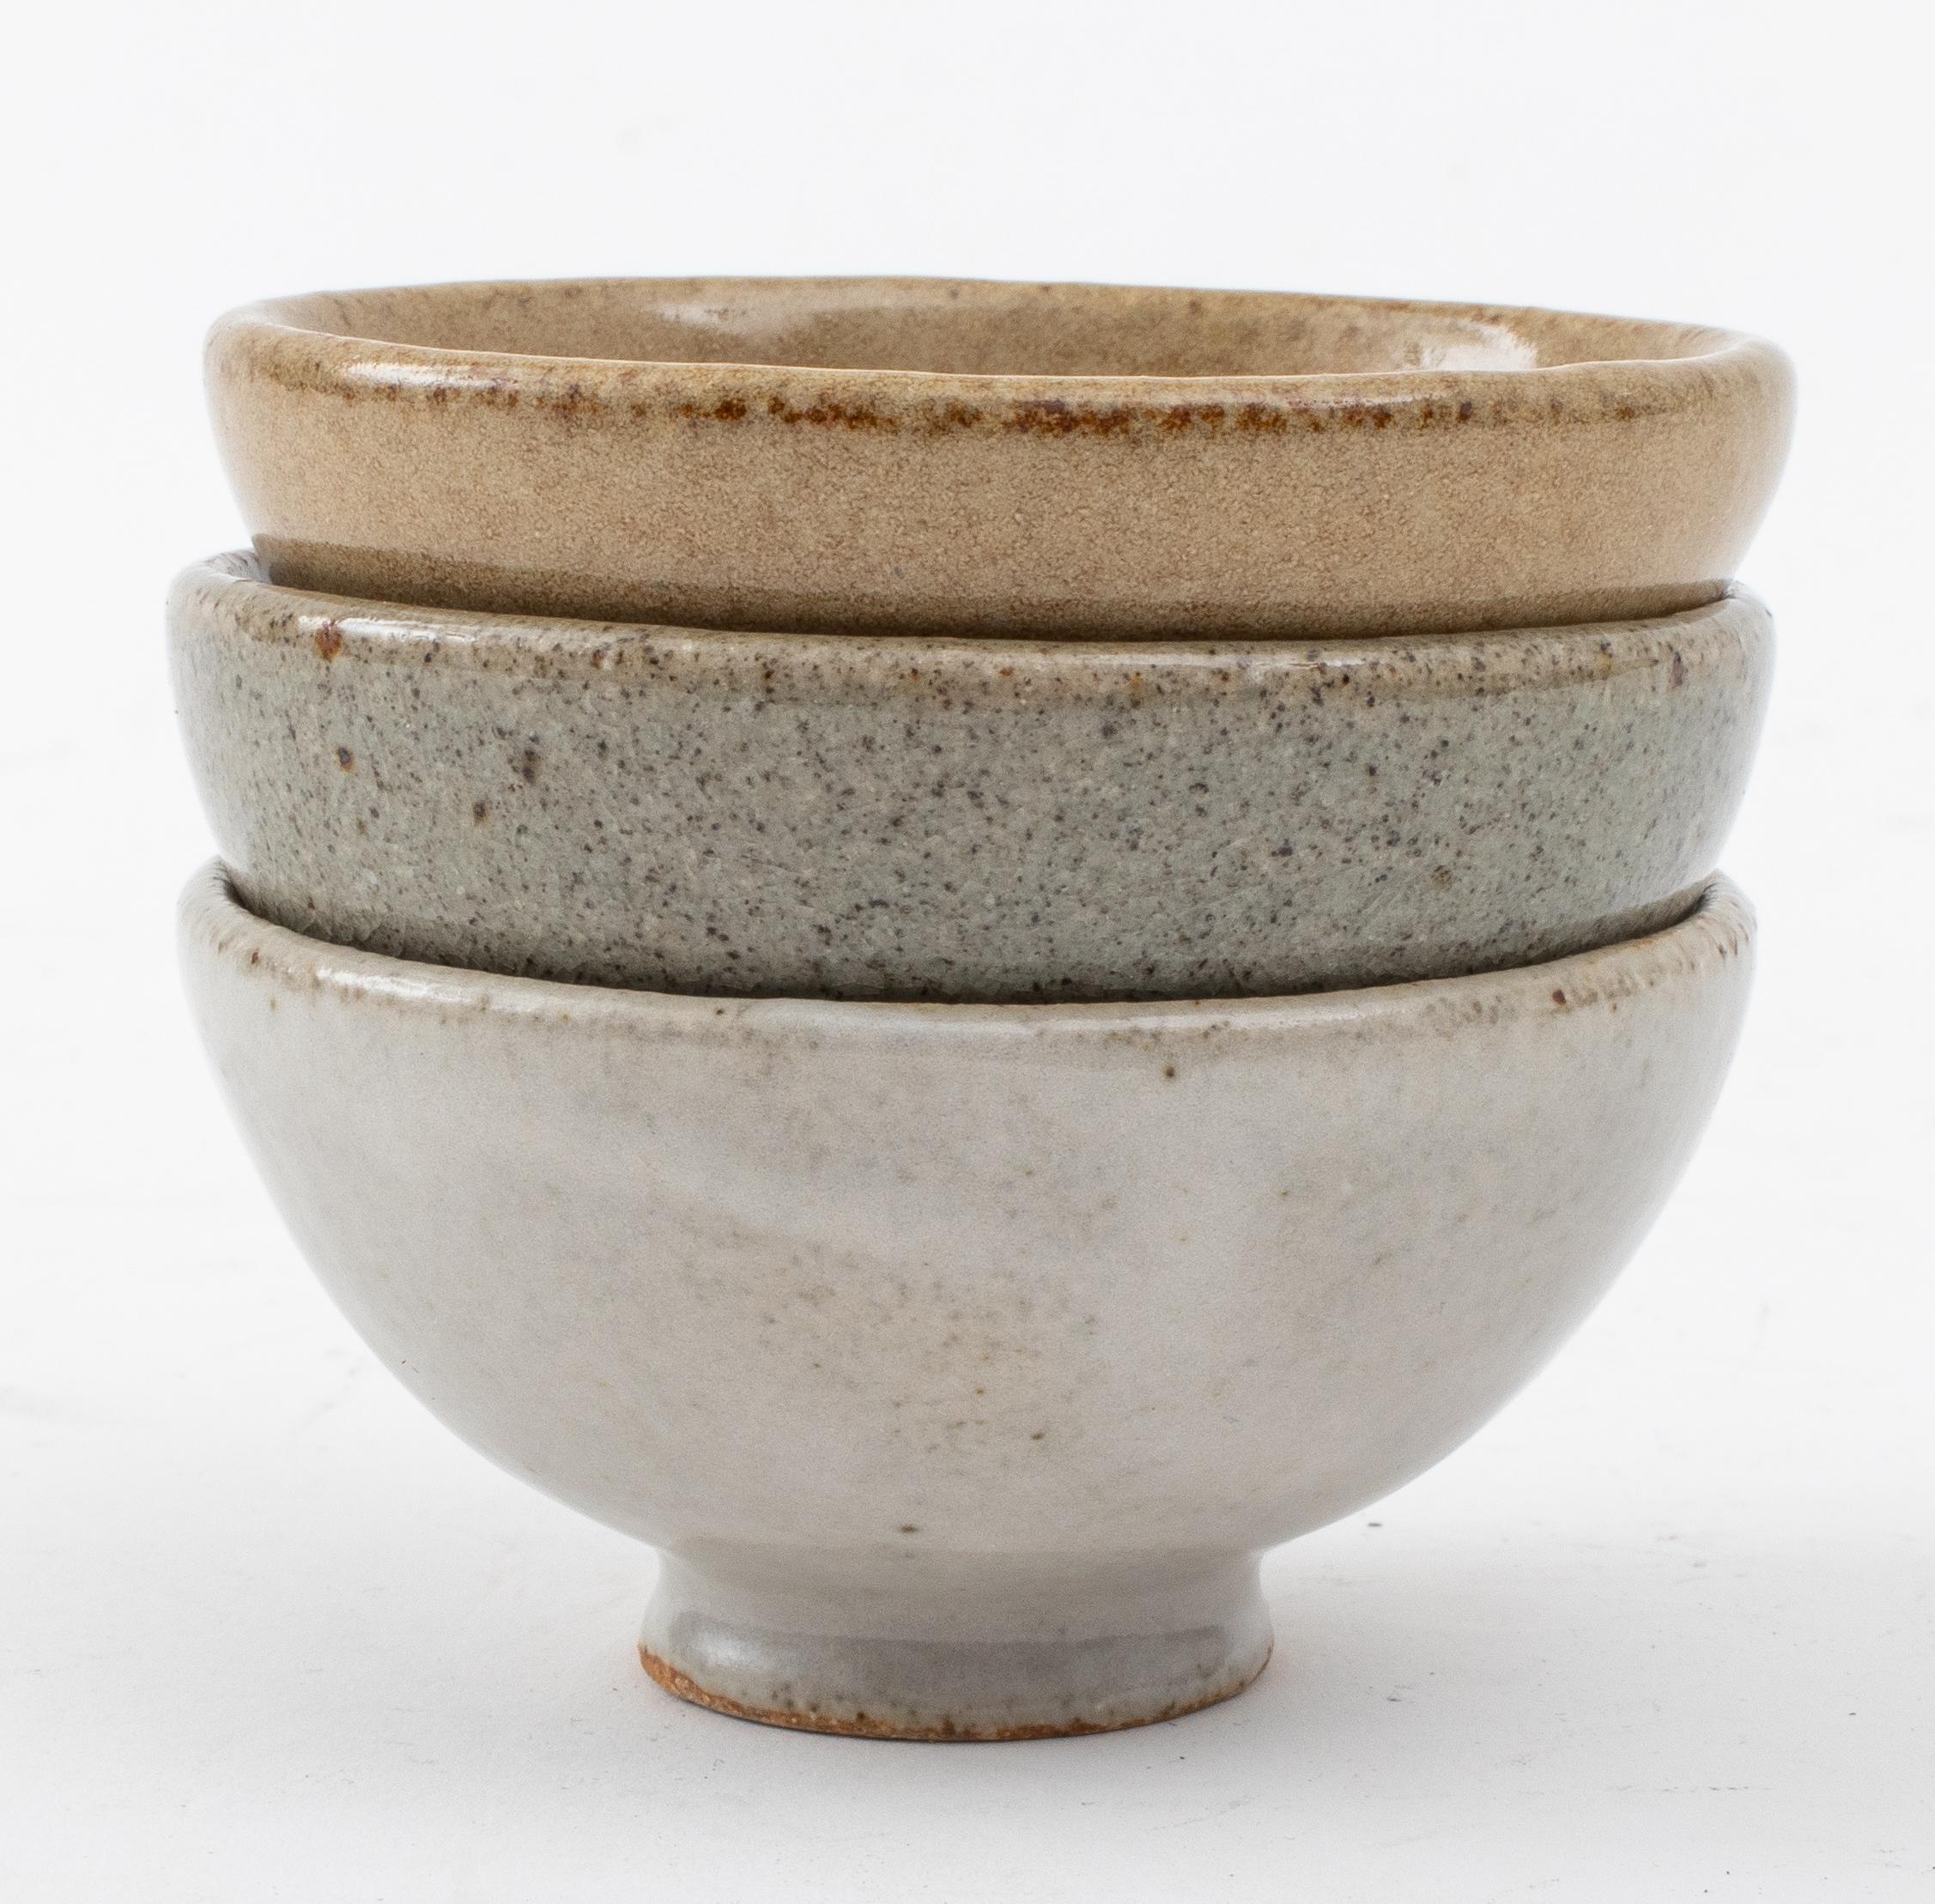 Steve Friedlander (attr., American, active 1964 - 1985) Glazed ceramic footed sake cups, (three) with grey, taupe, and blue stoneware glazed, the under side of each cup marked SF in square. 
Measures: 1.5